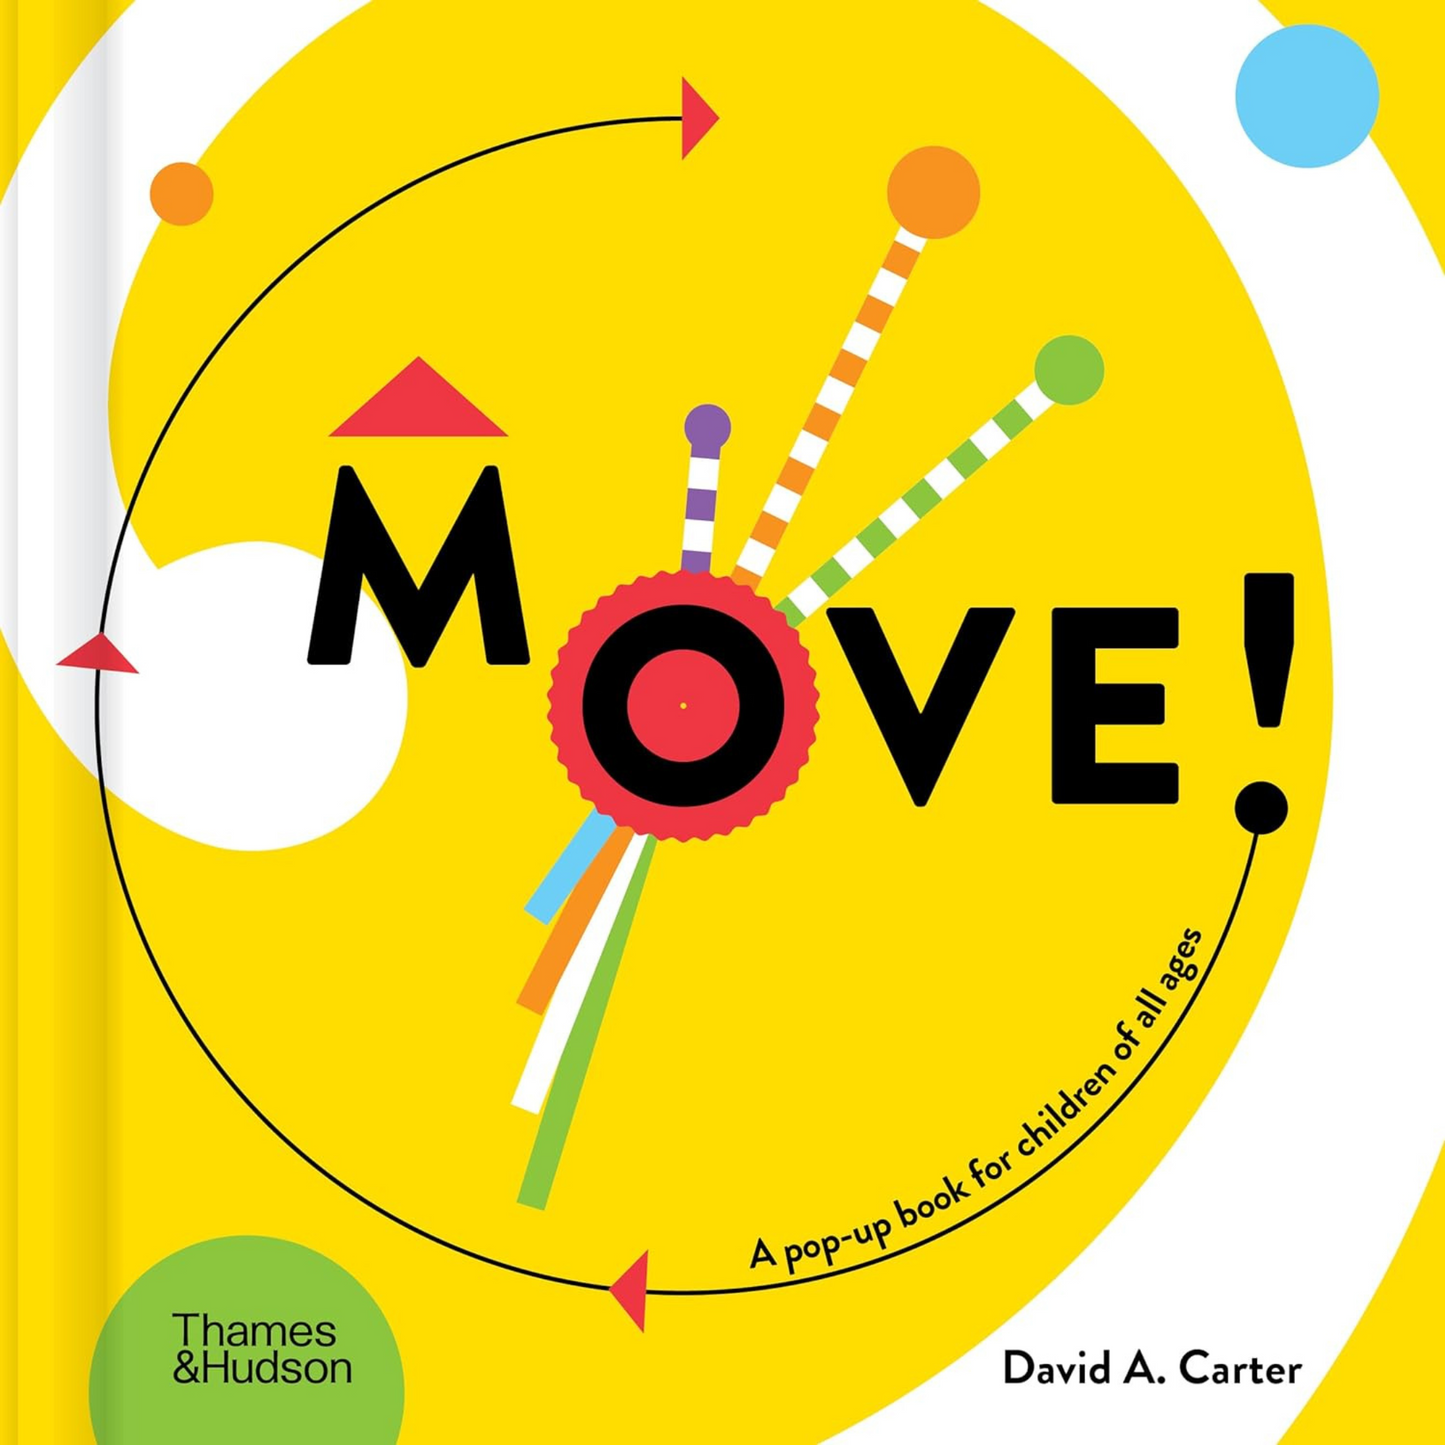 Move! by David A Carter